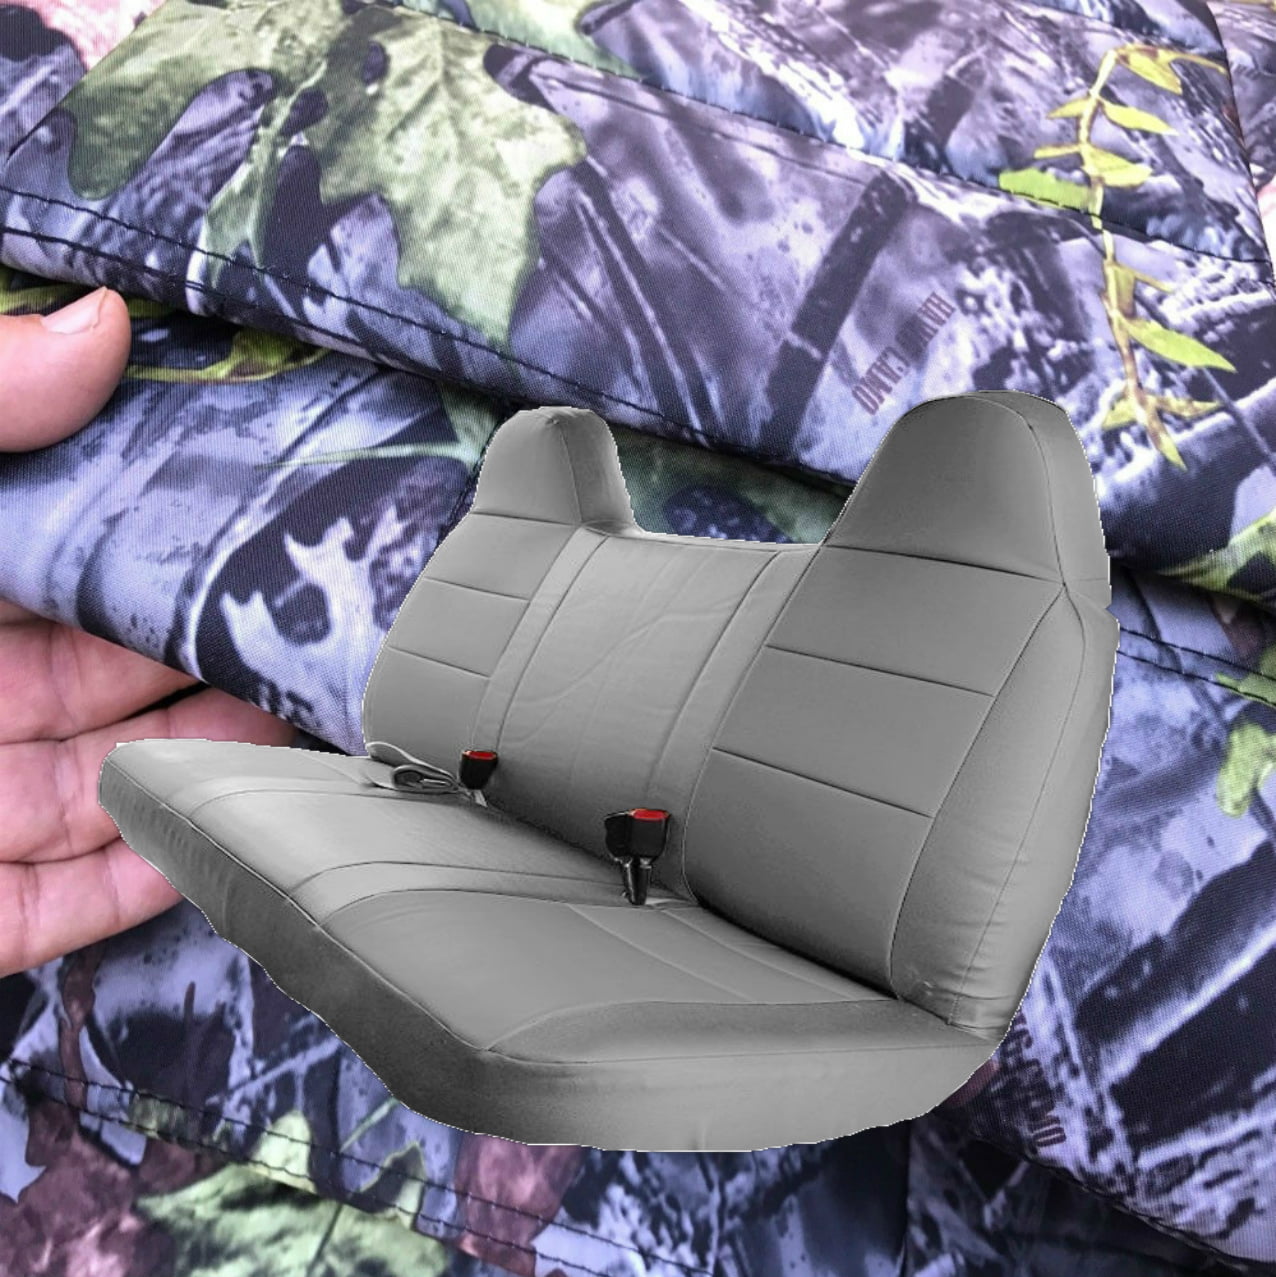 Camouflage, Camo F550 RealSeatCovers for Pickup Front Solid Bench Thick F23 RealSeatCoverss High Back Belt Cutout Custom Made Seat Cover for 1992-2010 Ford F-Series F150